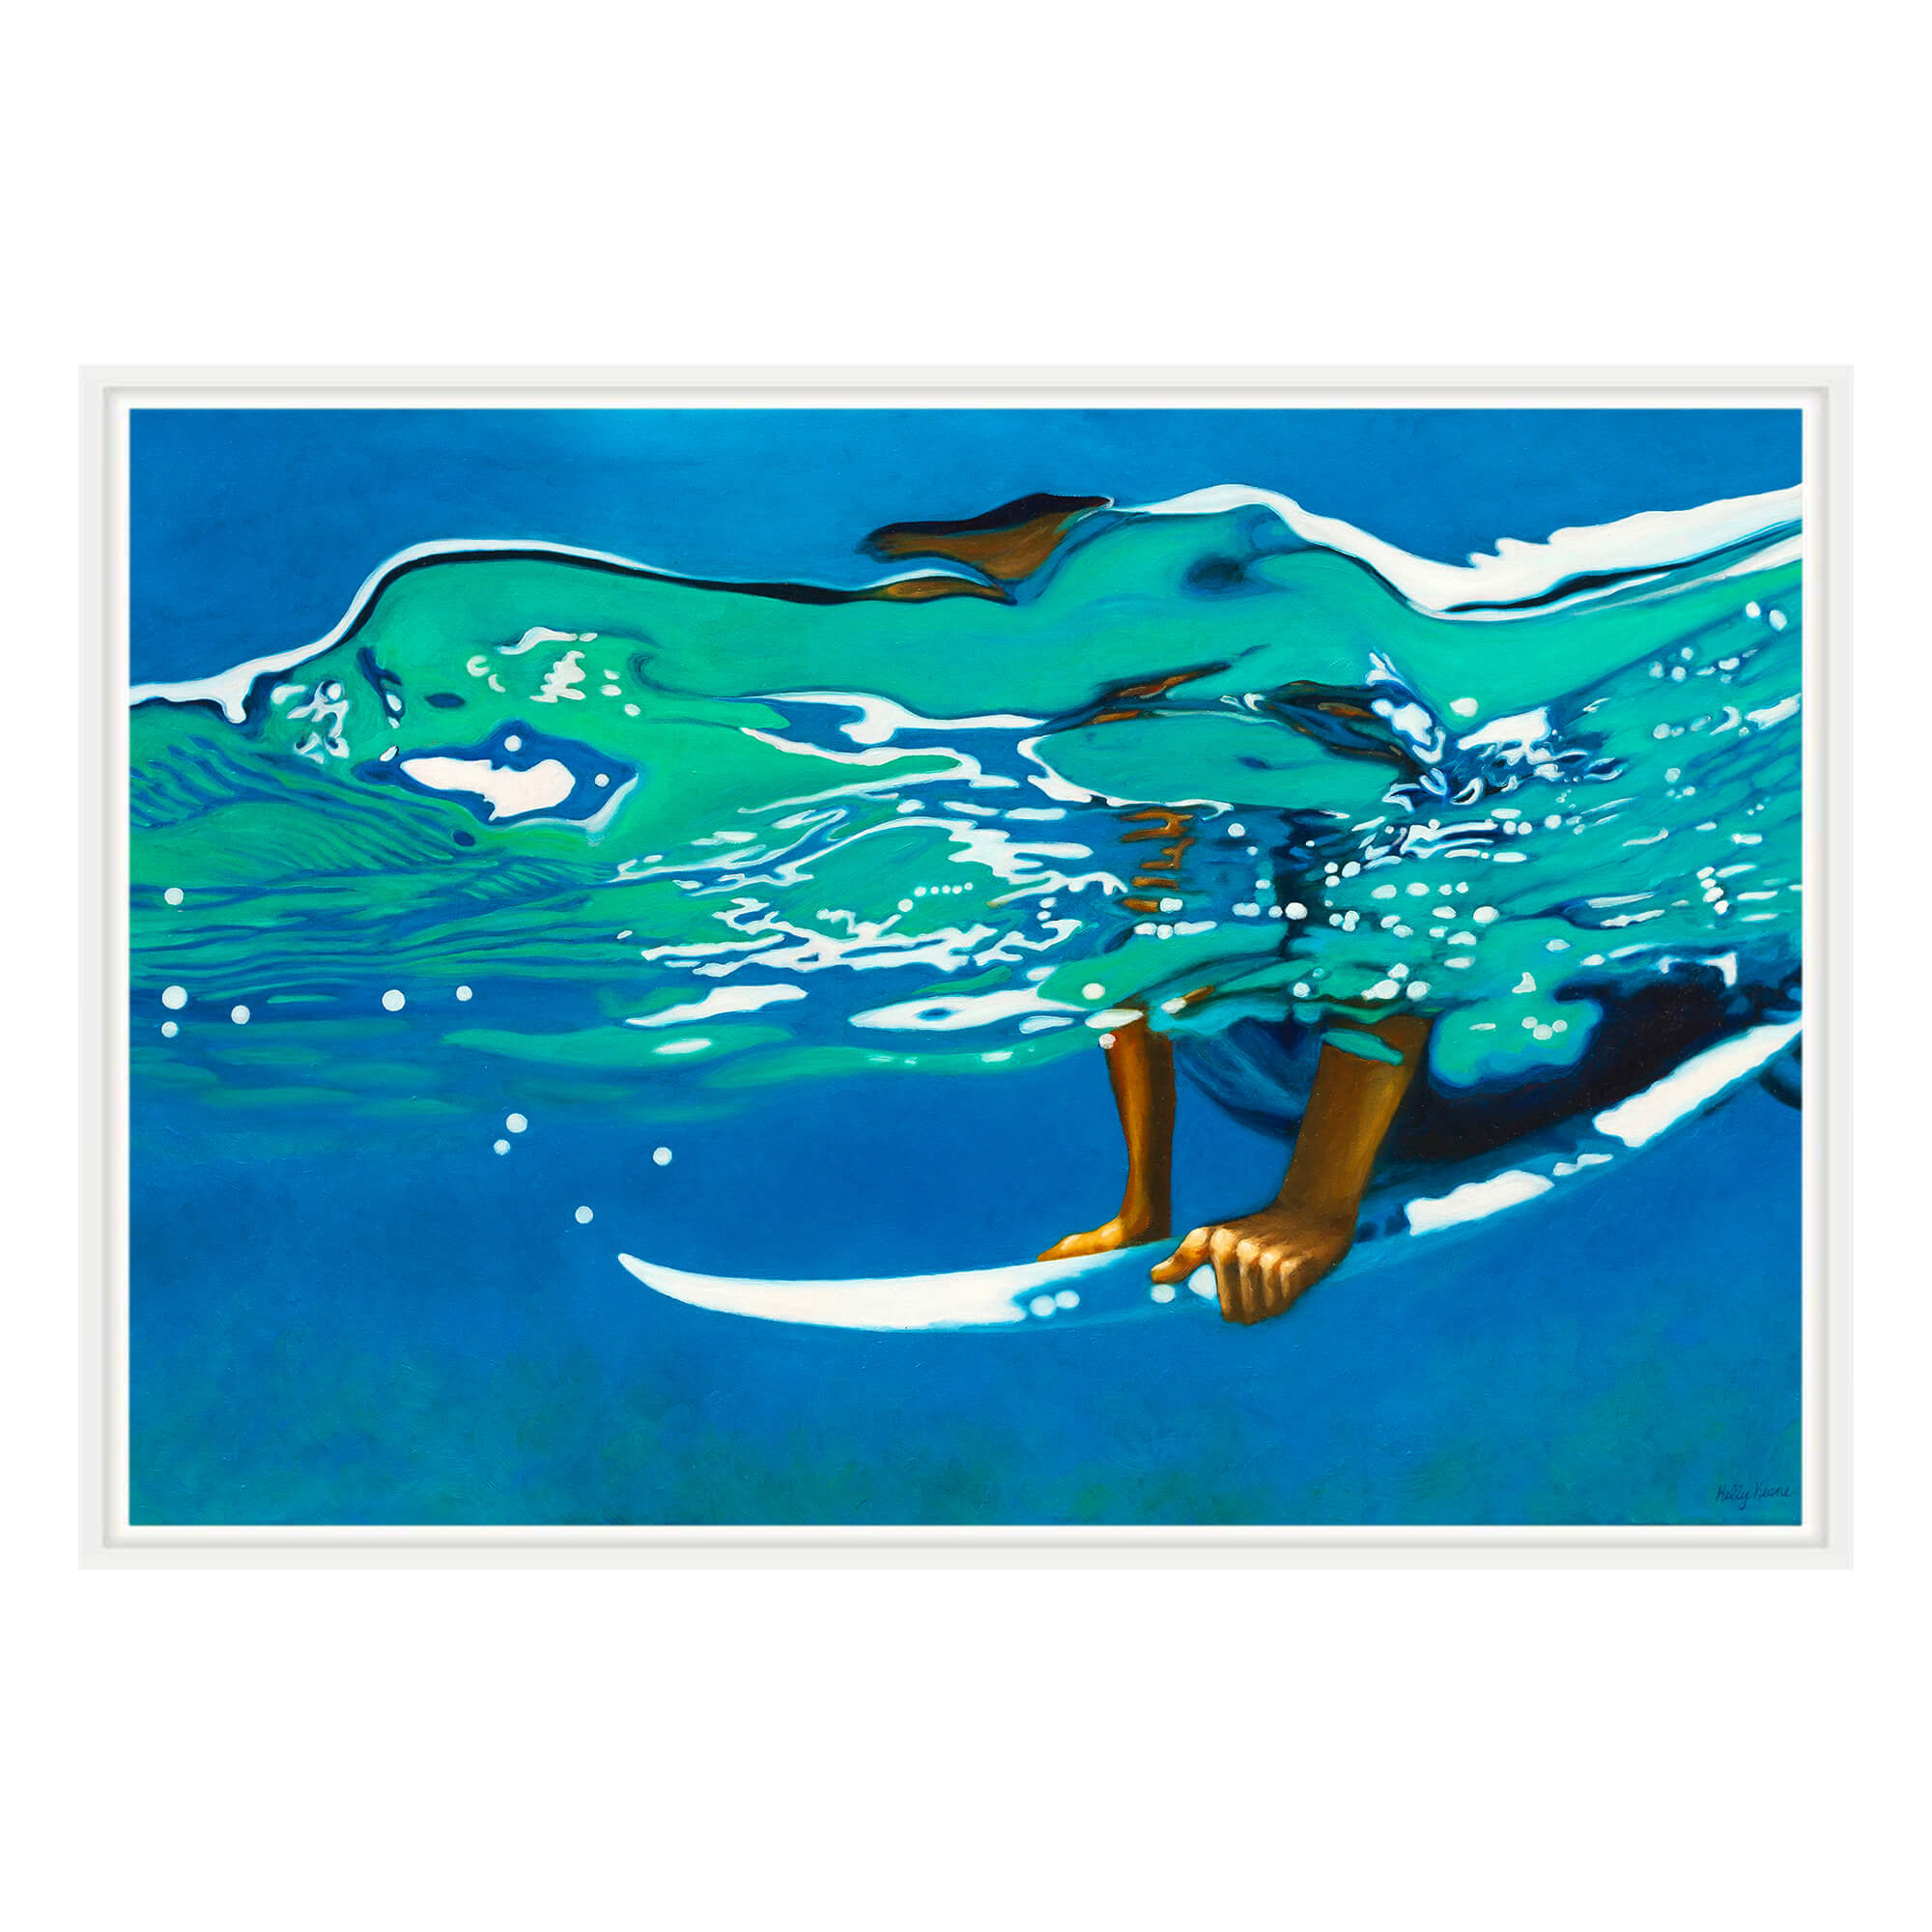 Canvas art print with white print featuring a man trying to duck over a big wave  by hawaii artist Kelly Keane